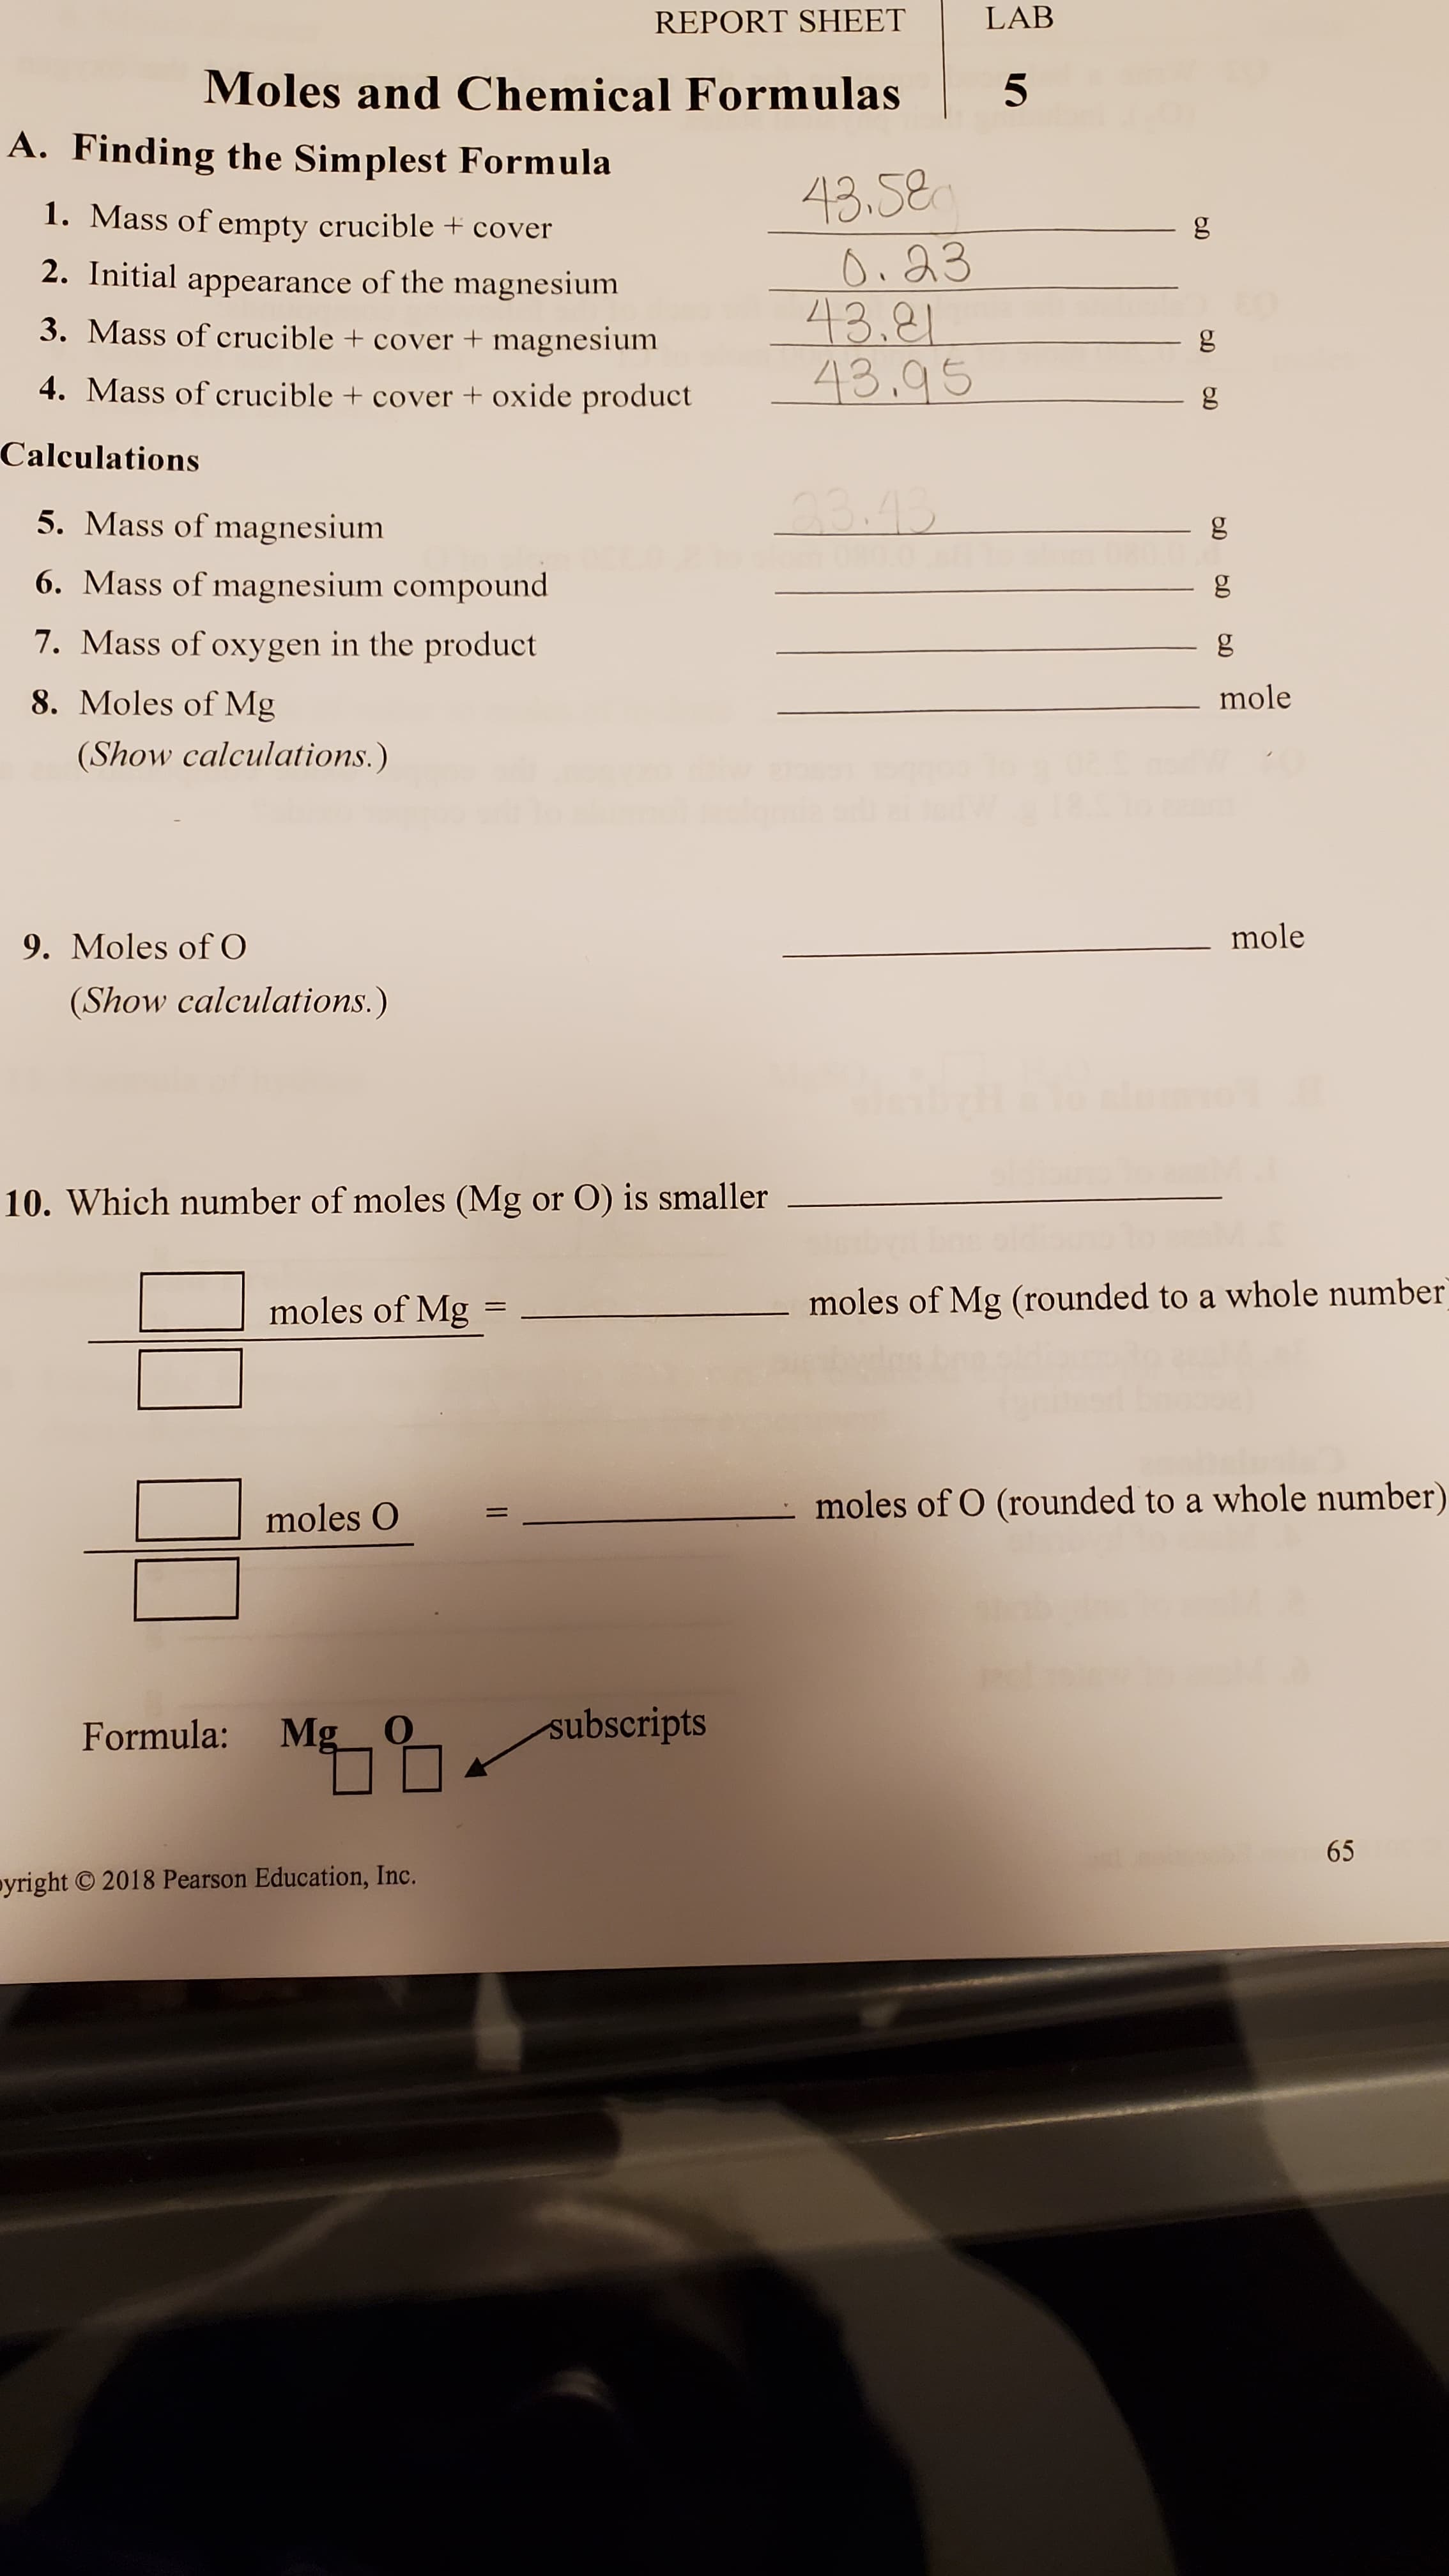 Moles and Chemical Formulas
A. Finding the Simplest Formula
43.58
Oi 23
43.81
43.95
1. Mass of empty crucible + cover
g
2. Initial appearance of the magnesium
3. Mass of crucible + cover + magnesium
4. Mass of crucible + cover + oxide product
Calculations
5. Mass of magnesium
23.43
6. Mass of magnesium compound
7. Mass of oxygen in the product
8. Moles of Mg
mole
(Show calculations.)
9. Moles of O
mole
(Show calculations.)
10. Which number of moles (Mg or O) is smaller
moles of Mg
moles of Mg (rounded to a whole numbe
moles O
moles of O (rounded to a whole number
Formula:
Mg
subscripts
